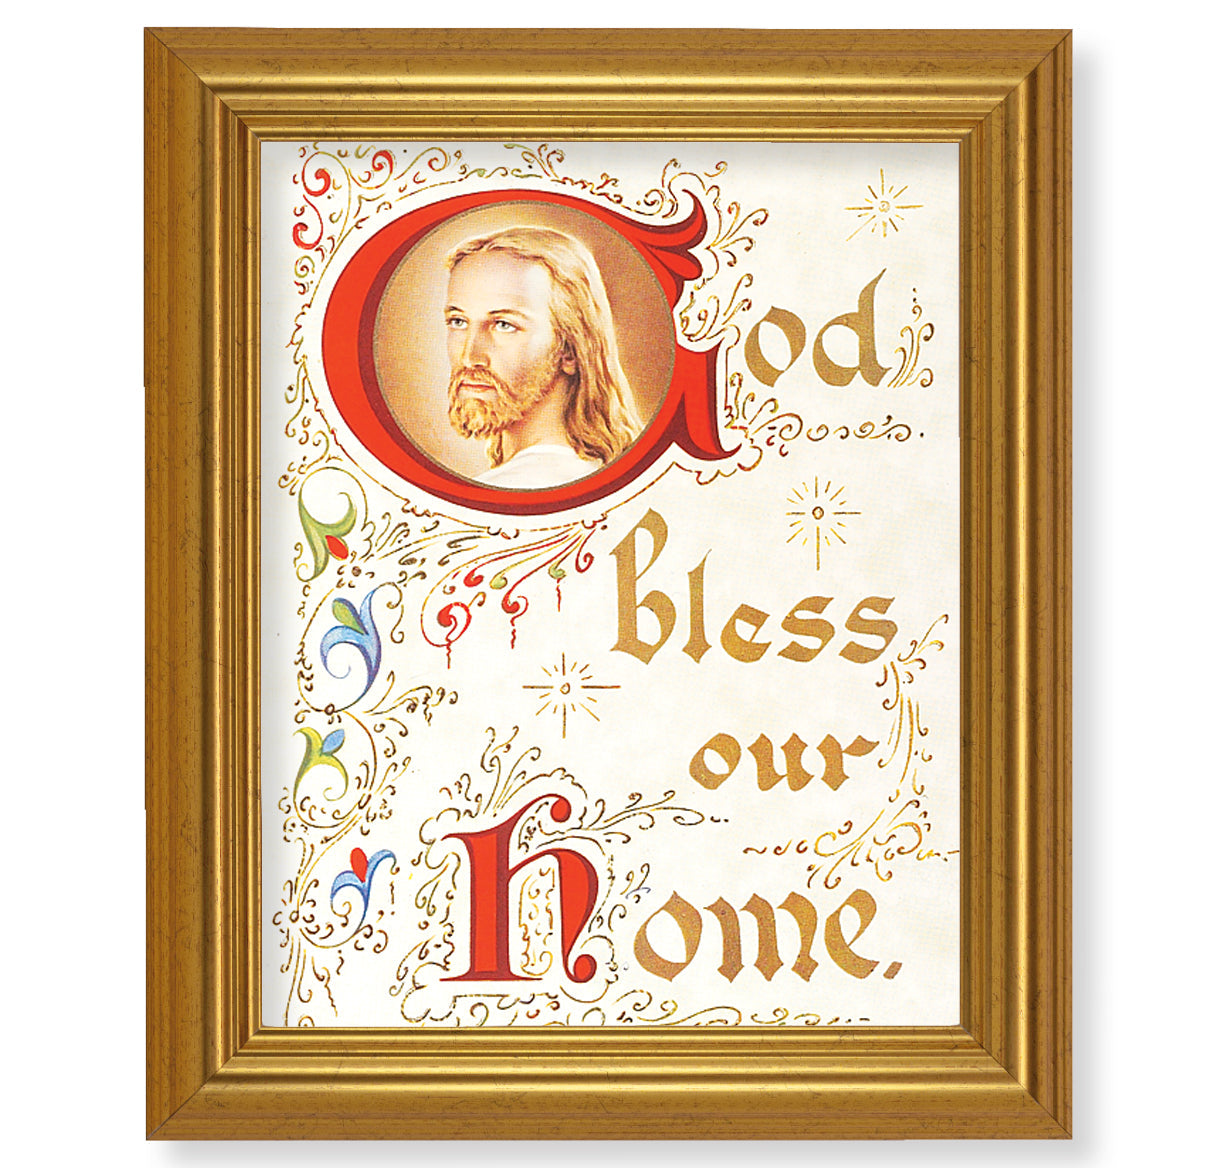 House Blessing Picture Framed Wall Art Decor, Large, Antique Gold-Leaf Classic Frame